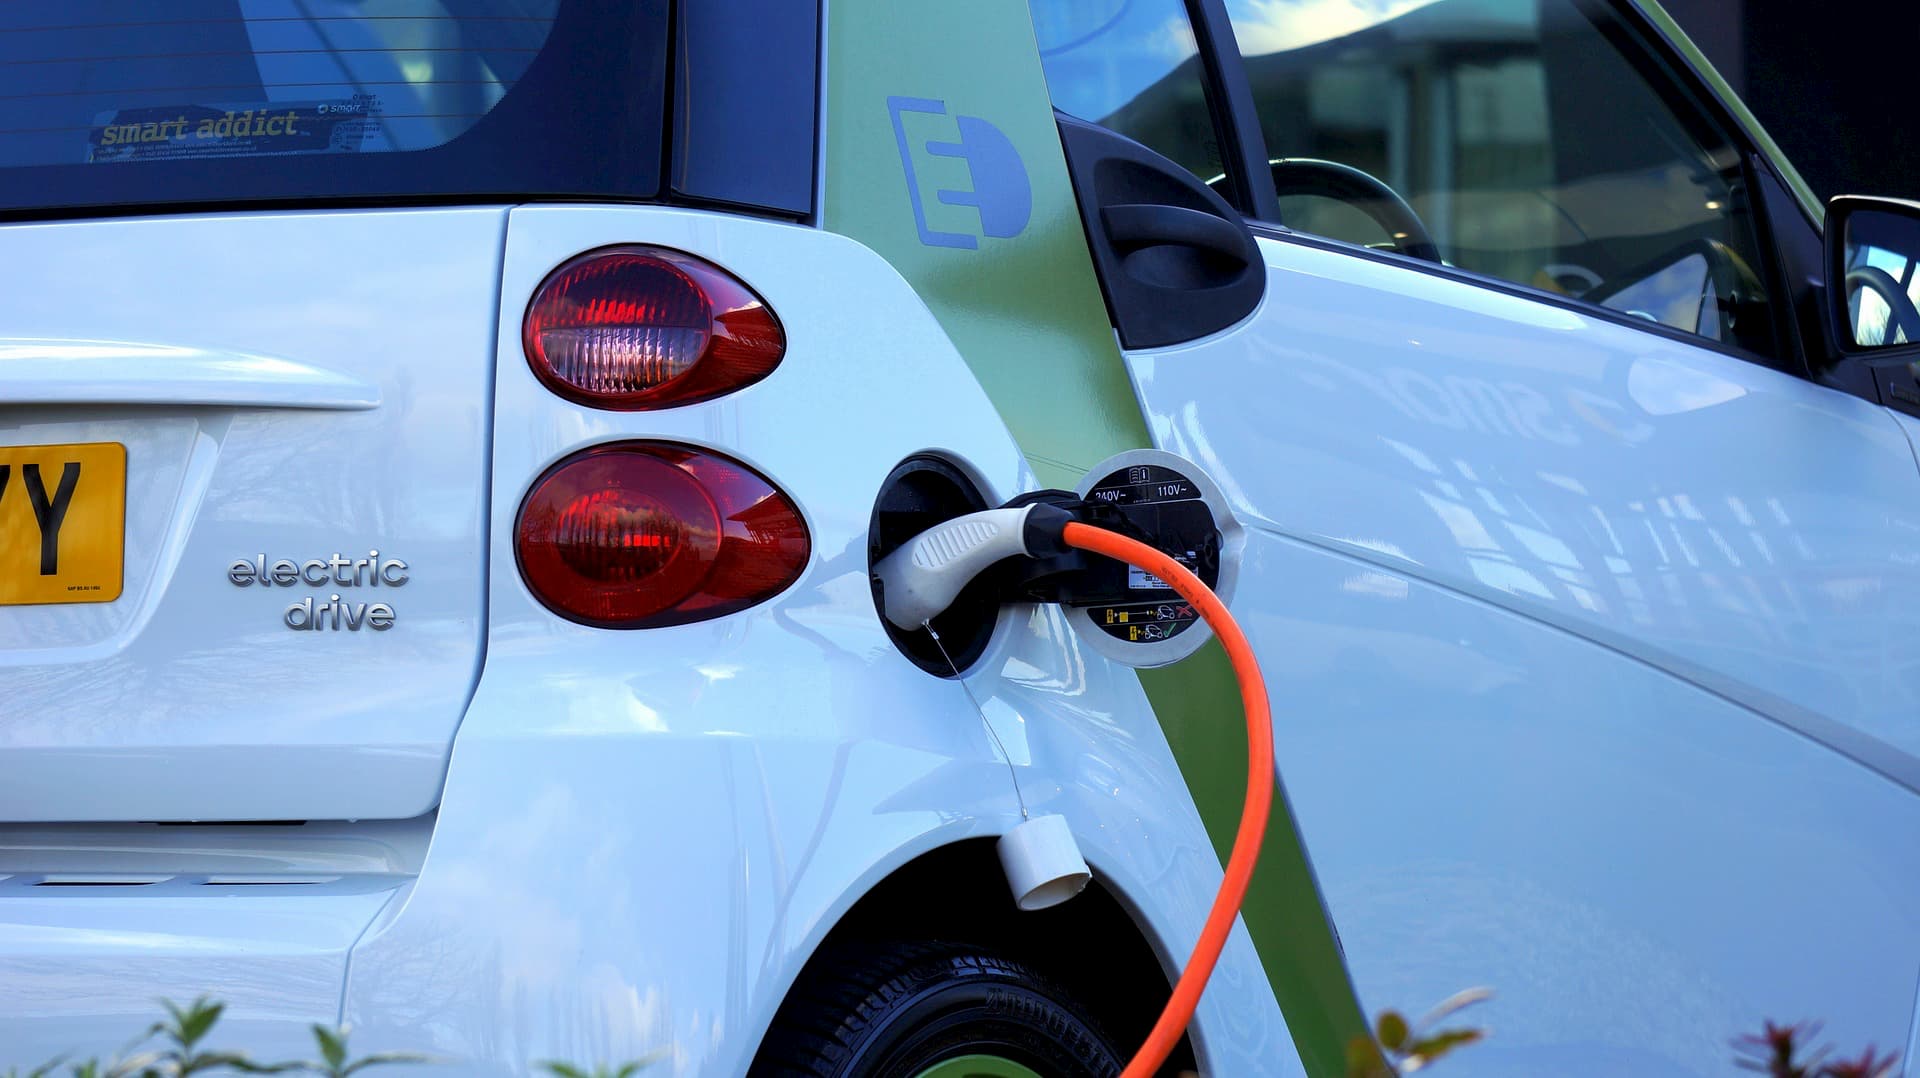 Calling all electric vehicle owners!